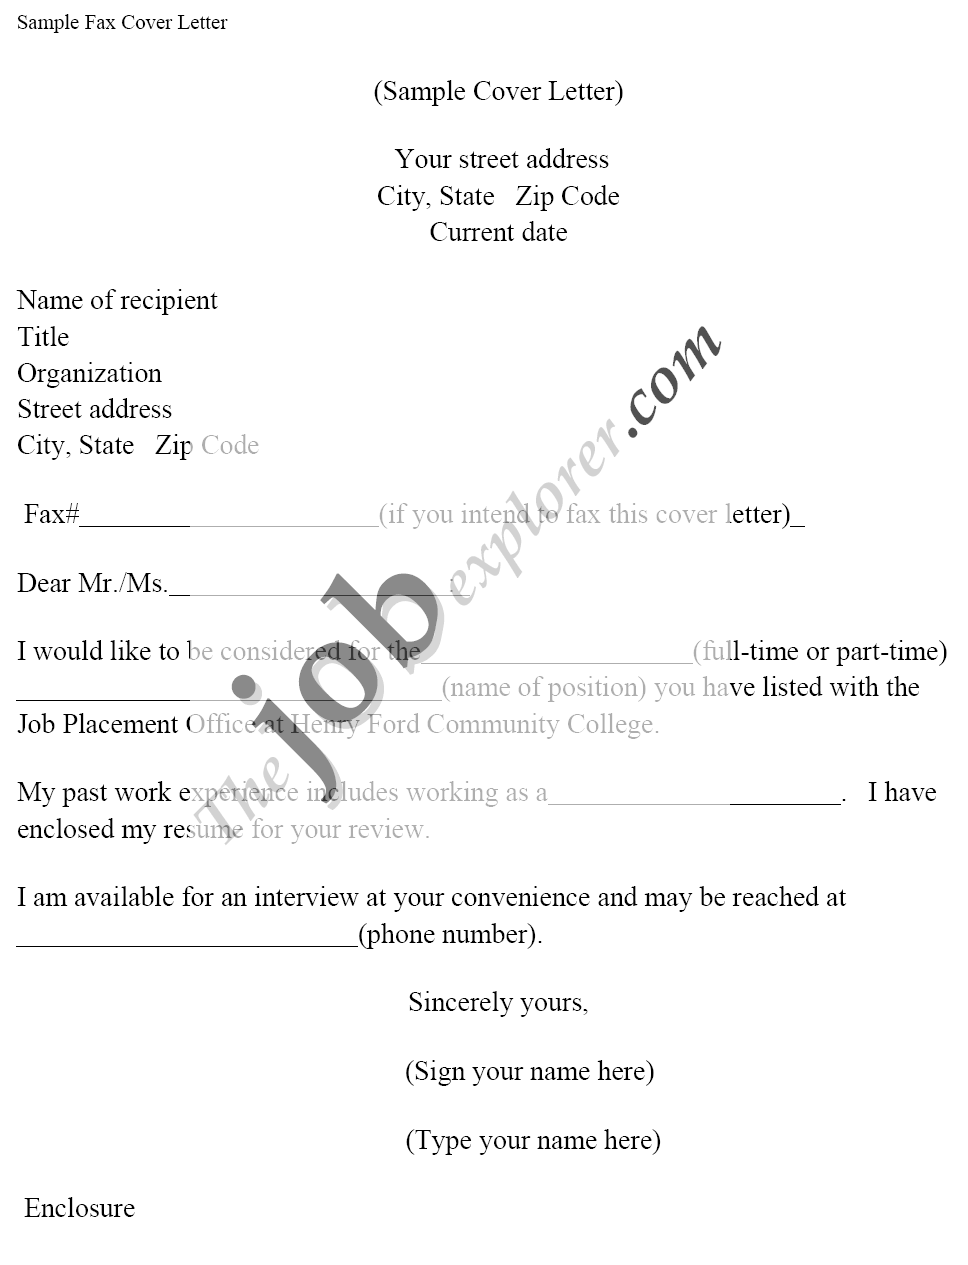 Cover Letter For A Fax from www.thejobexplorer.com